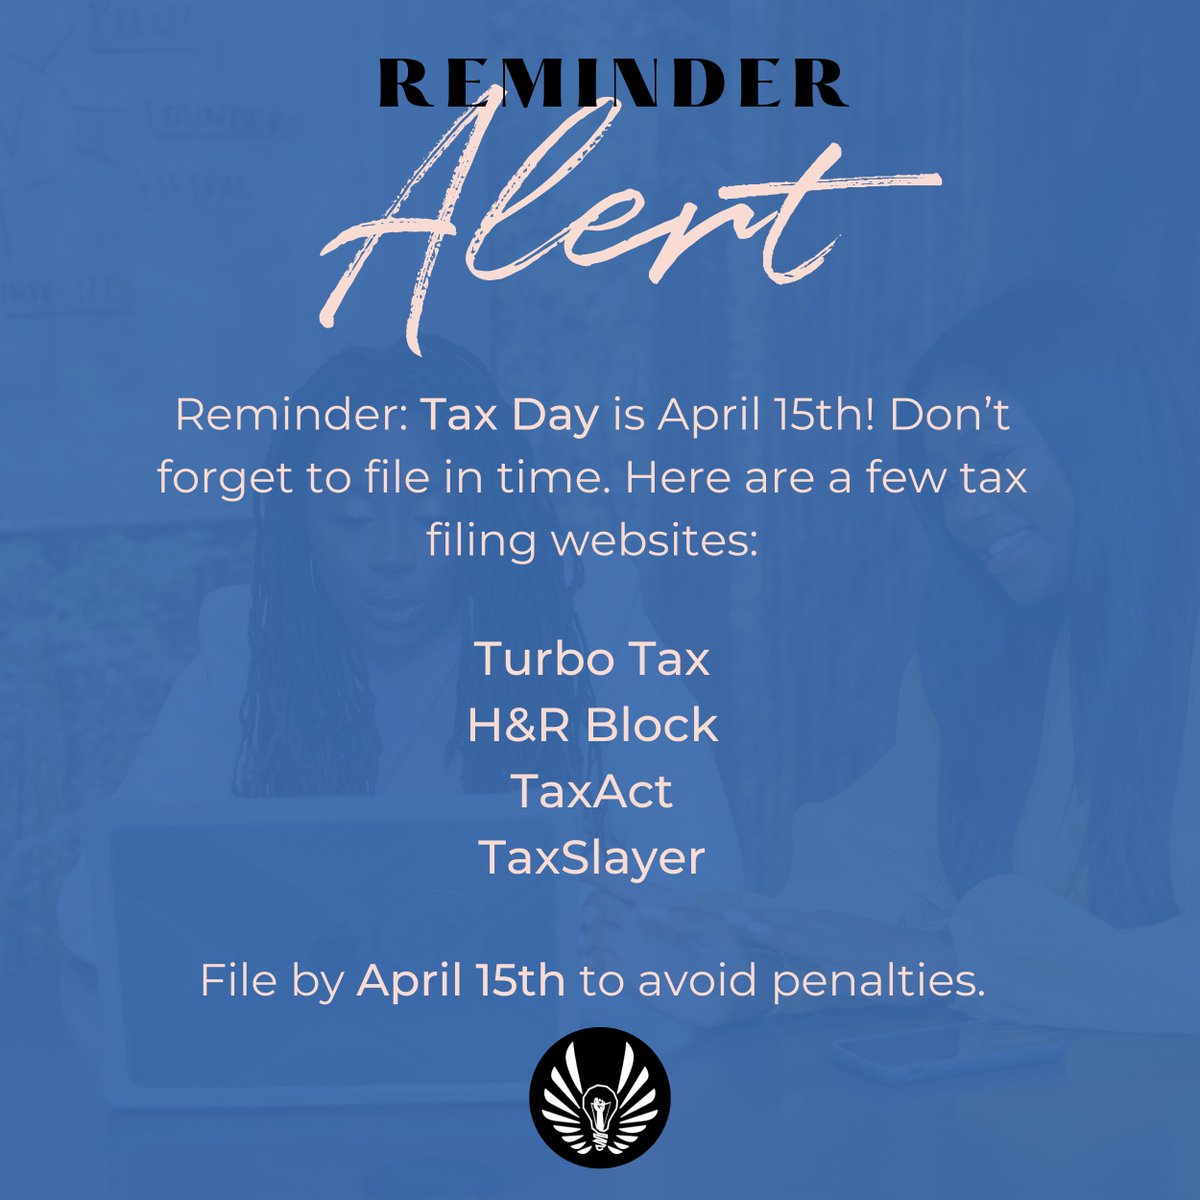 It's almost the tax deadline. April 15th is right around the corner. You don't want the penalties for being late. Head to irs.gov for more information. #Entrepreneurship #SmallBusiness #CommunityOrNothing